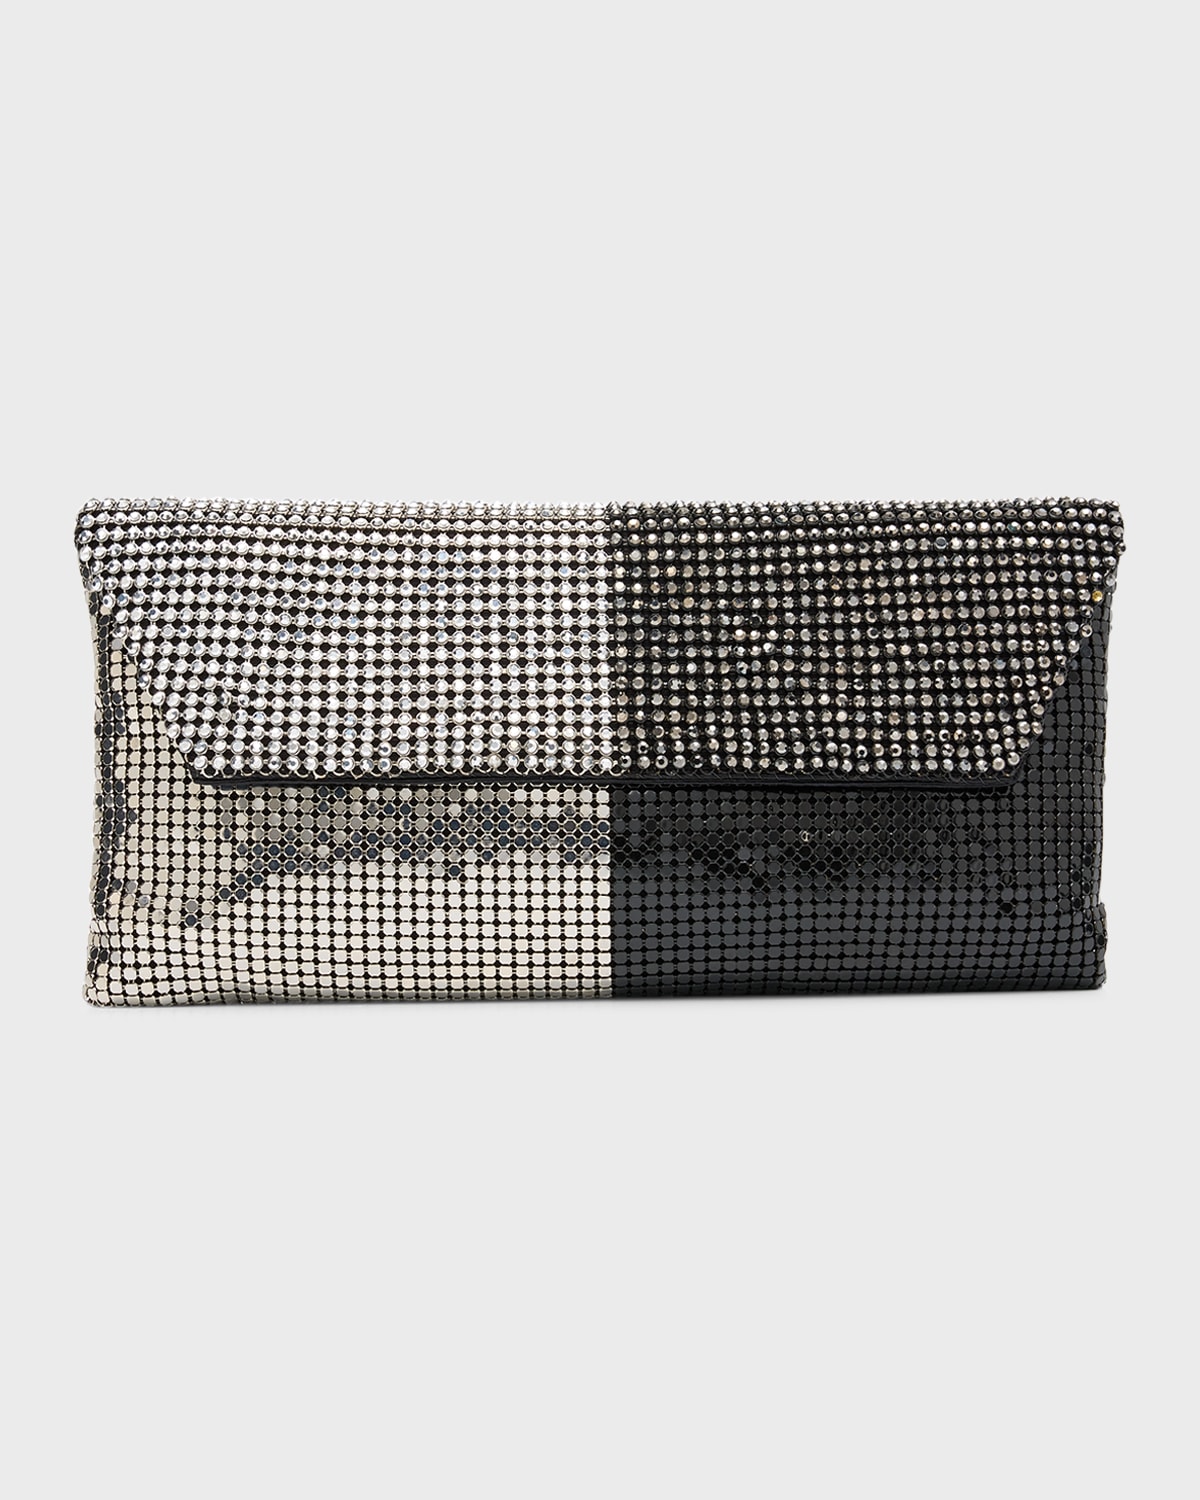 WHITING & DAVIS DUET TWO-TONE CRYSTAL CLUTCH BAG